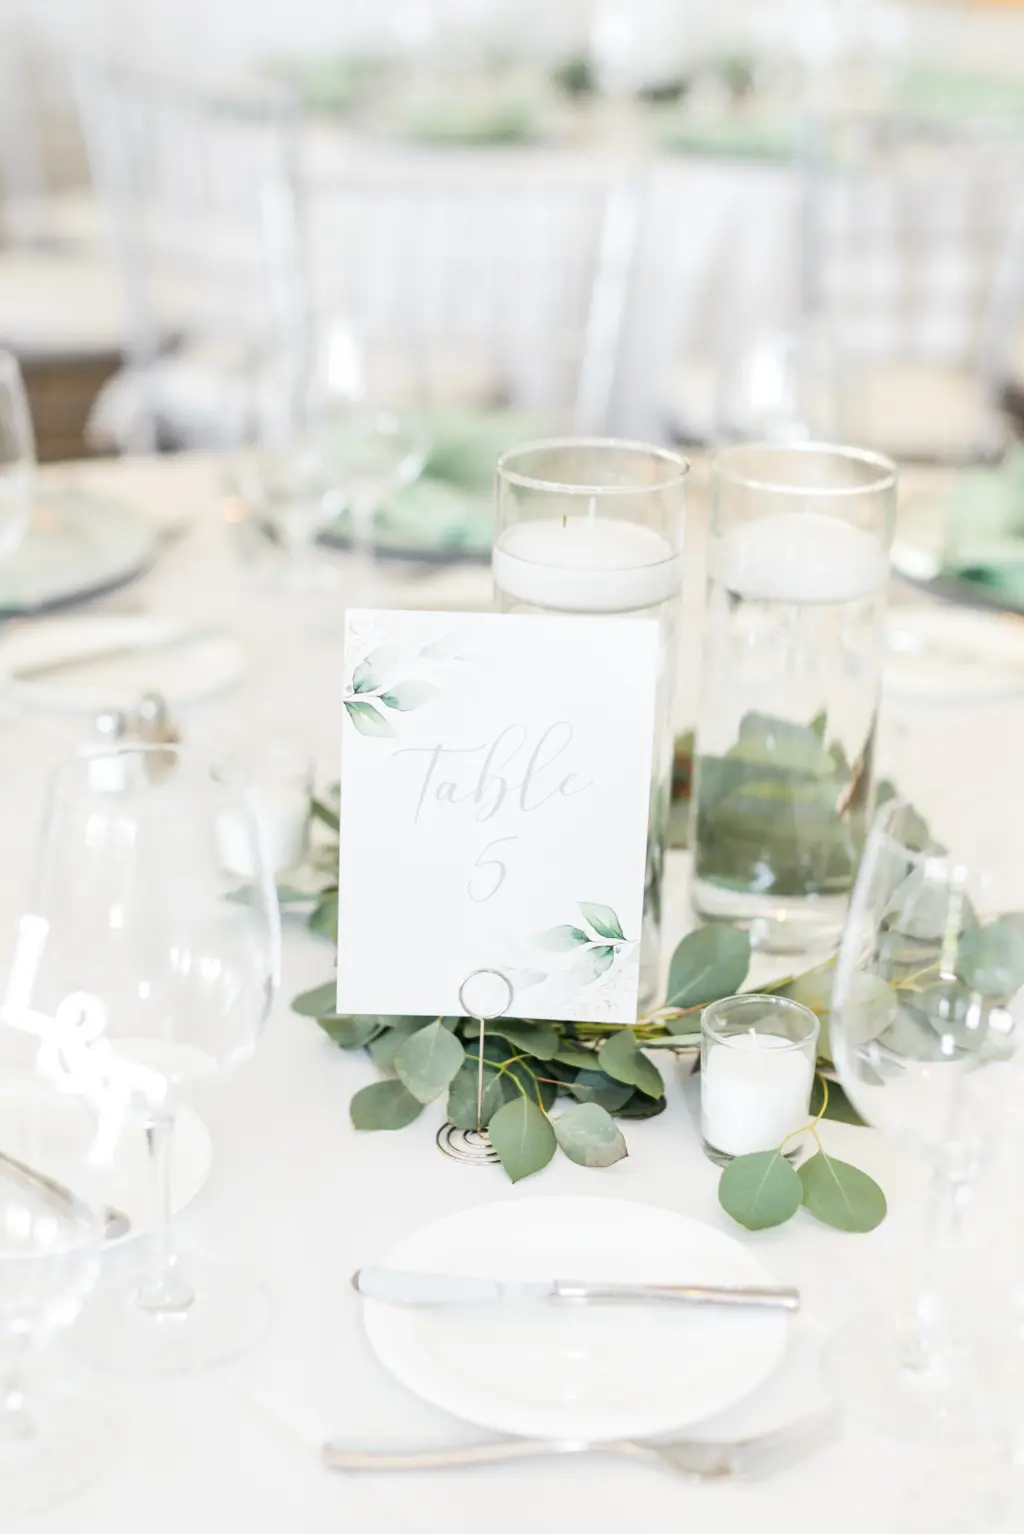 Elegant Green and White Wedding Reception Simple Minimalist Table Decor Ideas | Floating Candles and Greenery Garland Centerpiece Inspiration | Watercolor Greenery Table Number